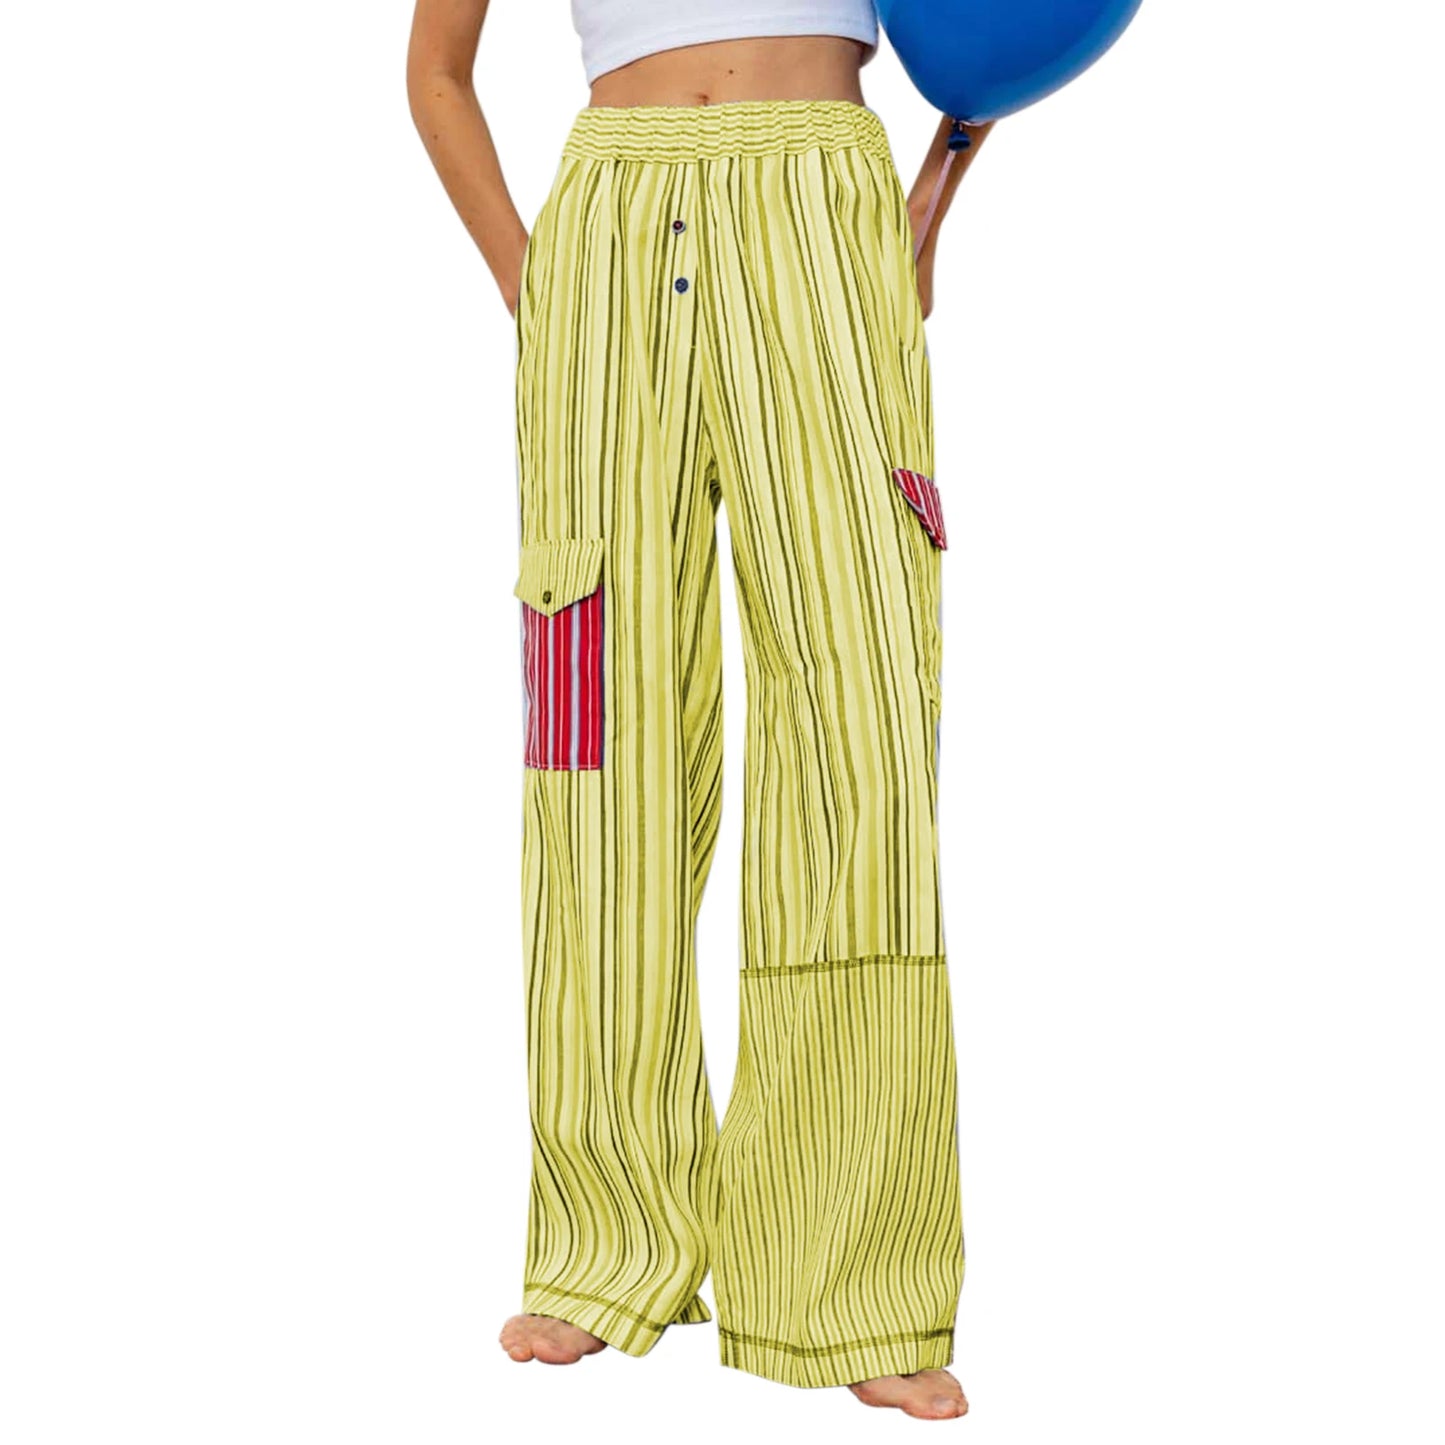 Summer Pants- Women's Patchwork Striped Lounge Pants for Beach Lounging- Yellow- Chuzko Women Clothing